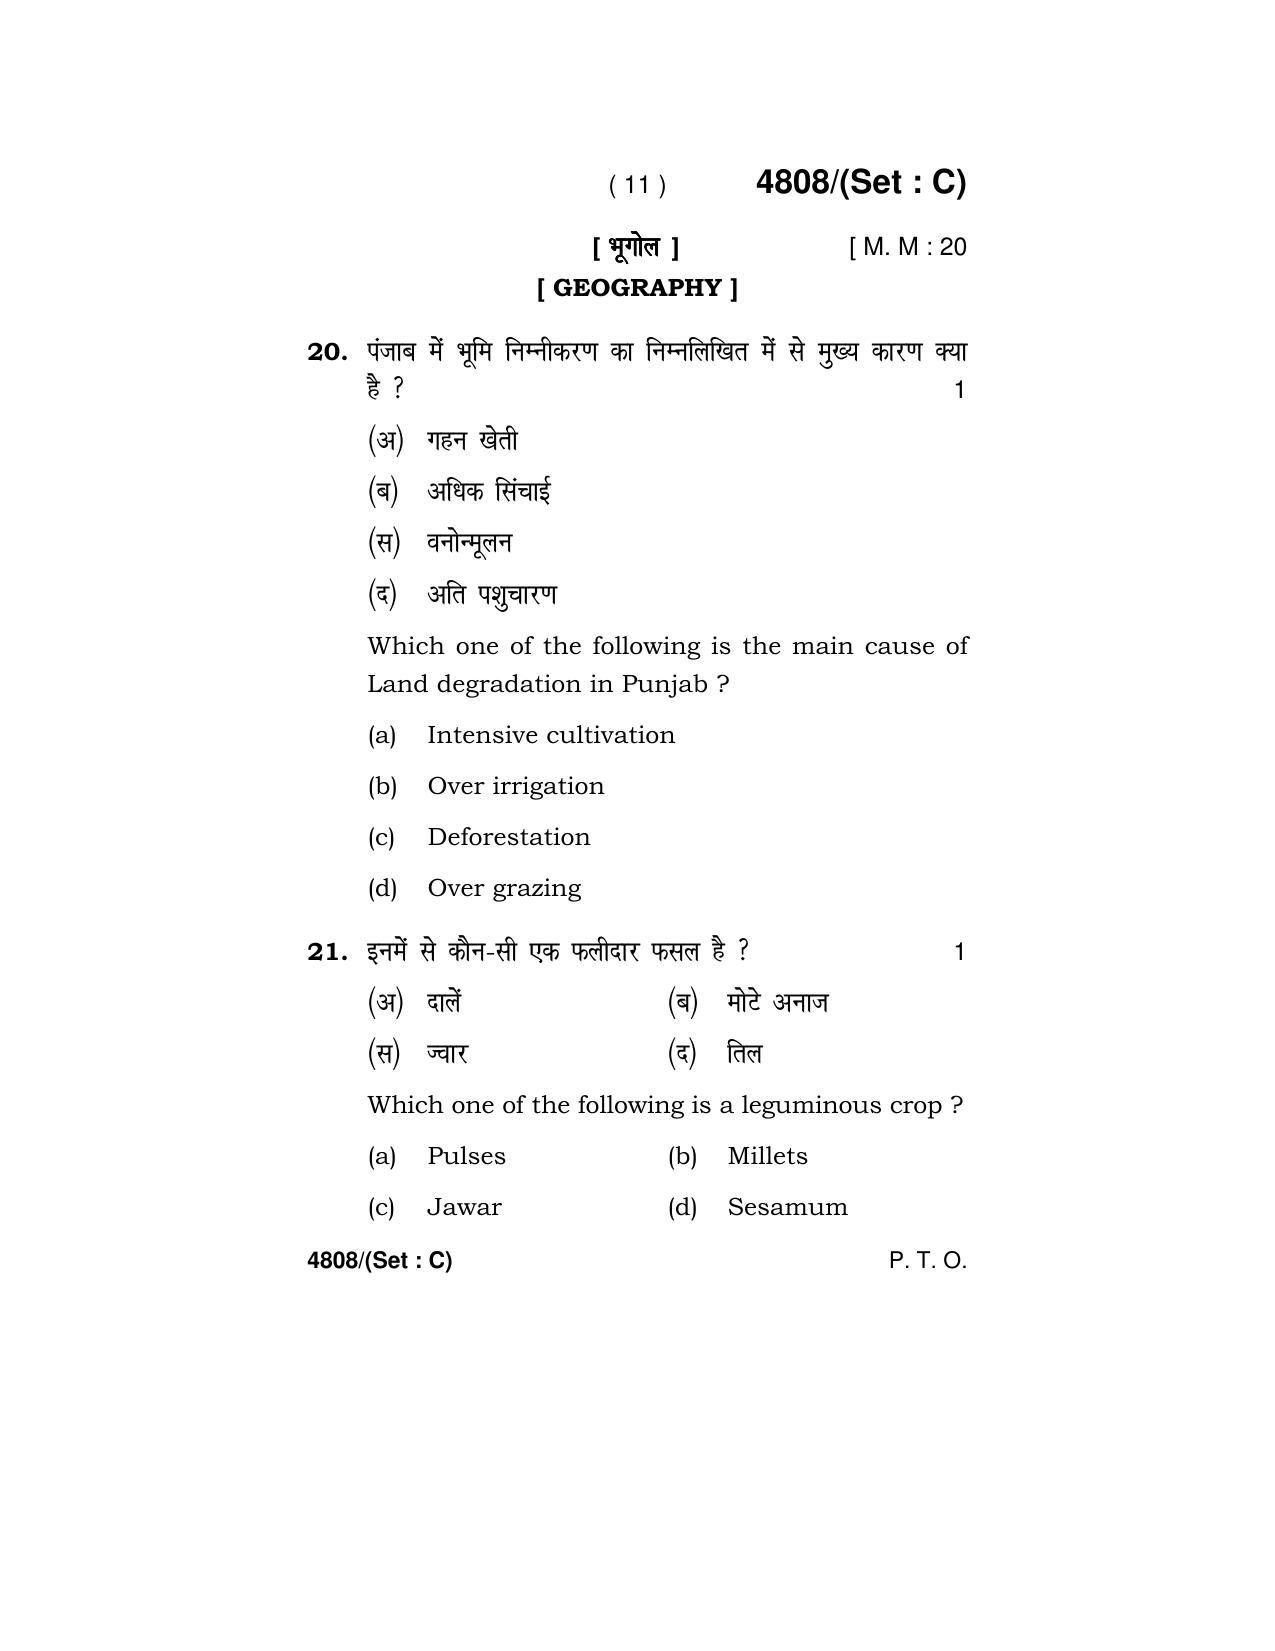 Haryana Board HBSE Class 10 Social Science (Re-appear) 2020 Question Paper - Page 43